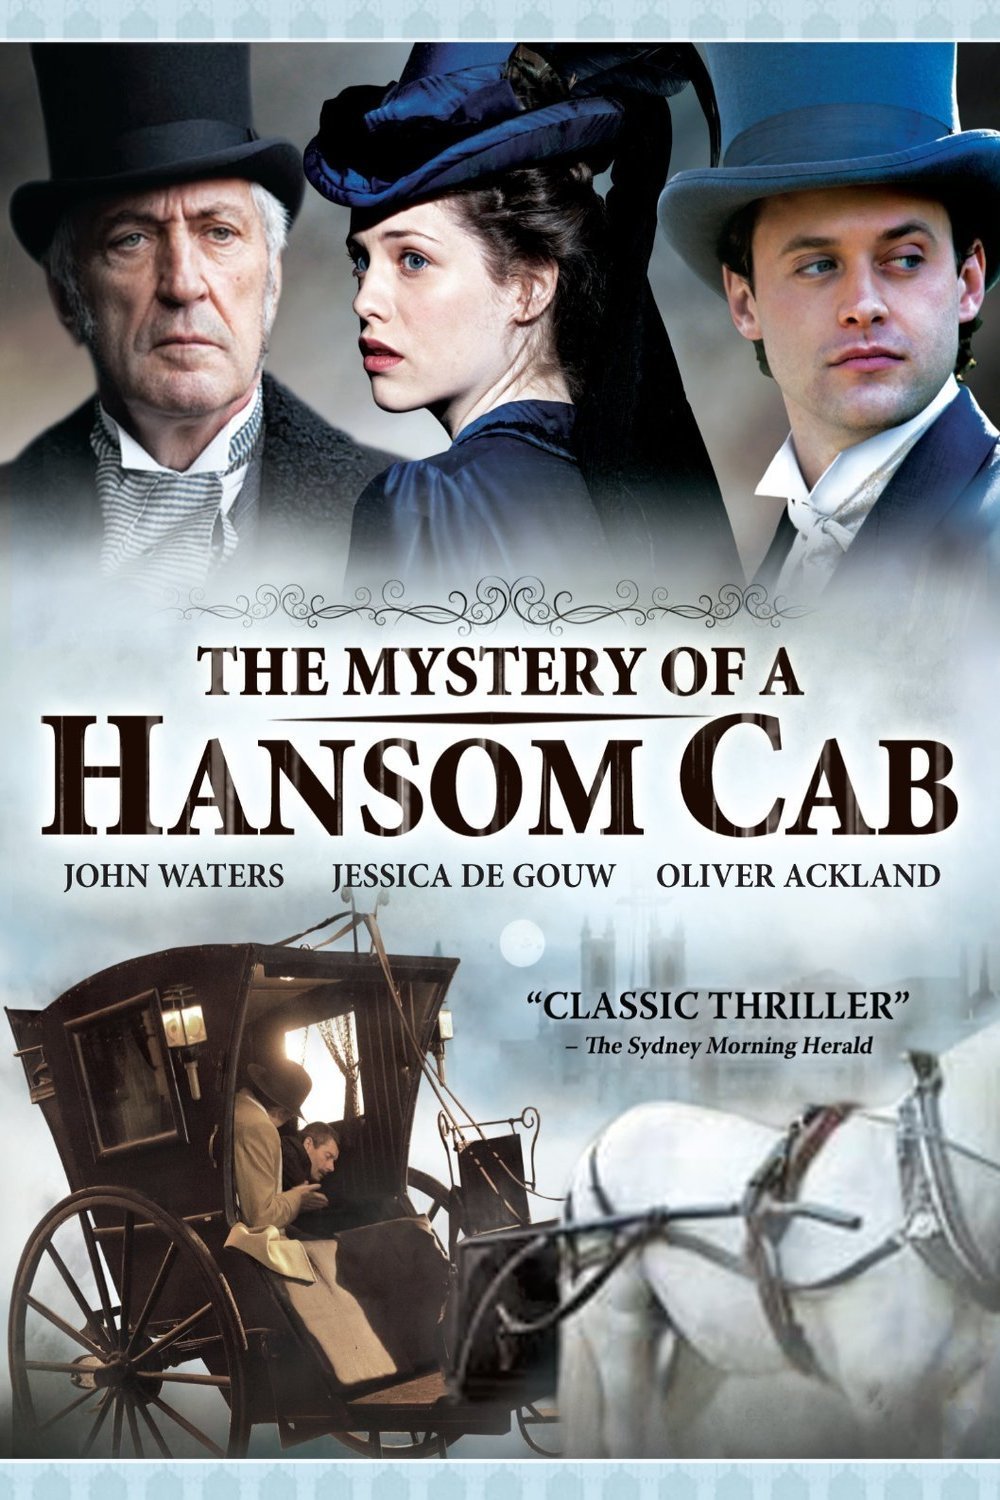 Poster of the movie The Mystery of a Hansom Cab